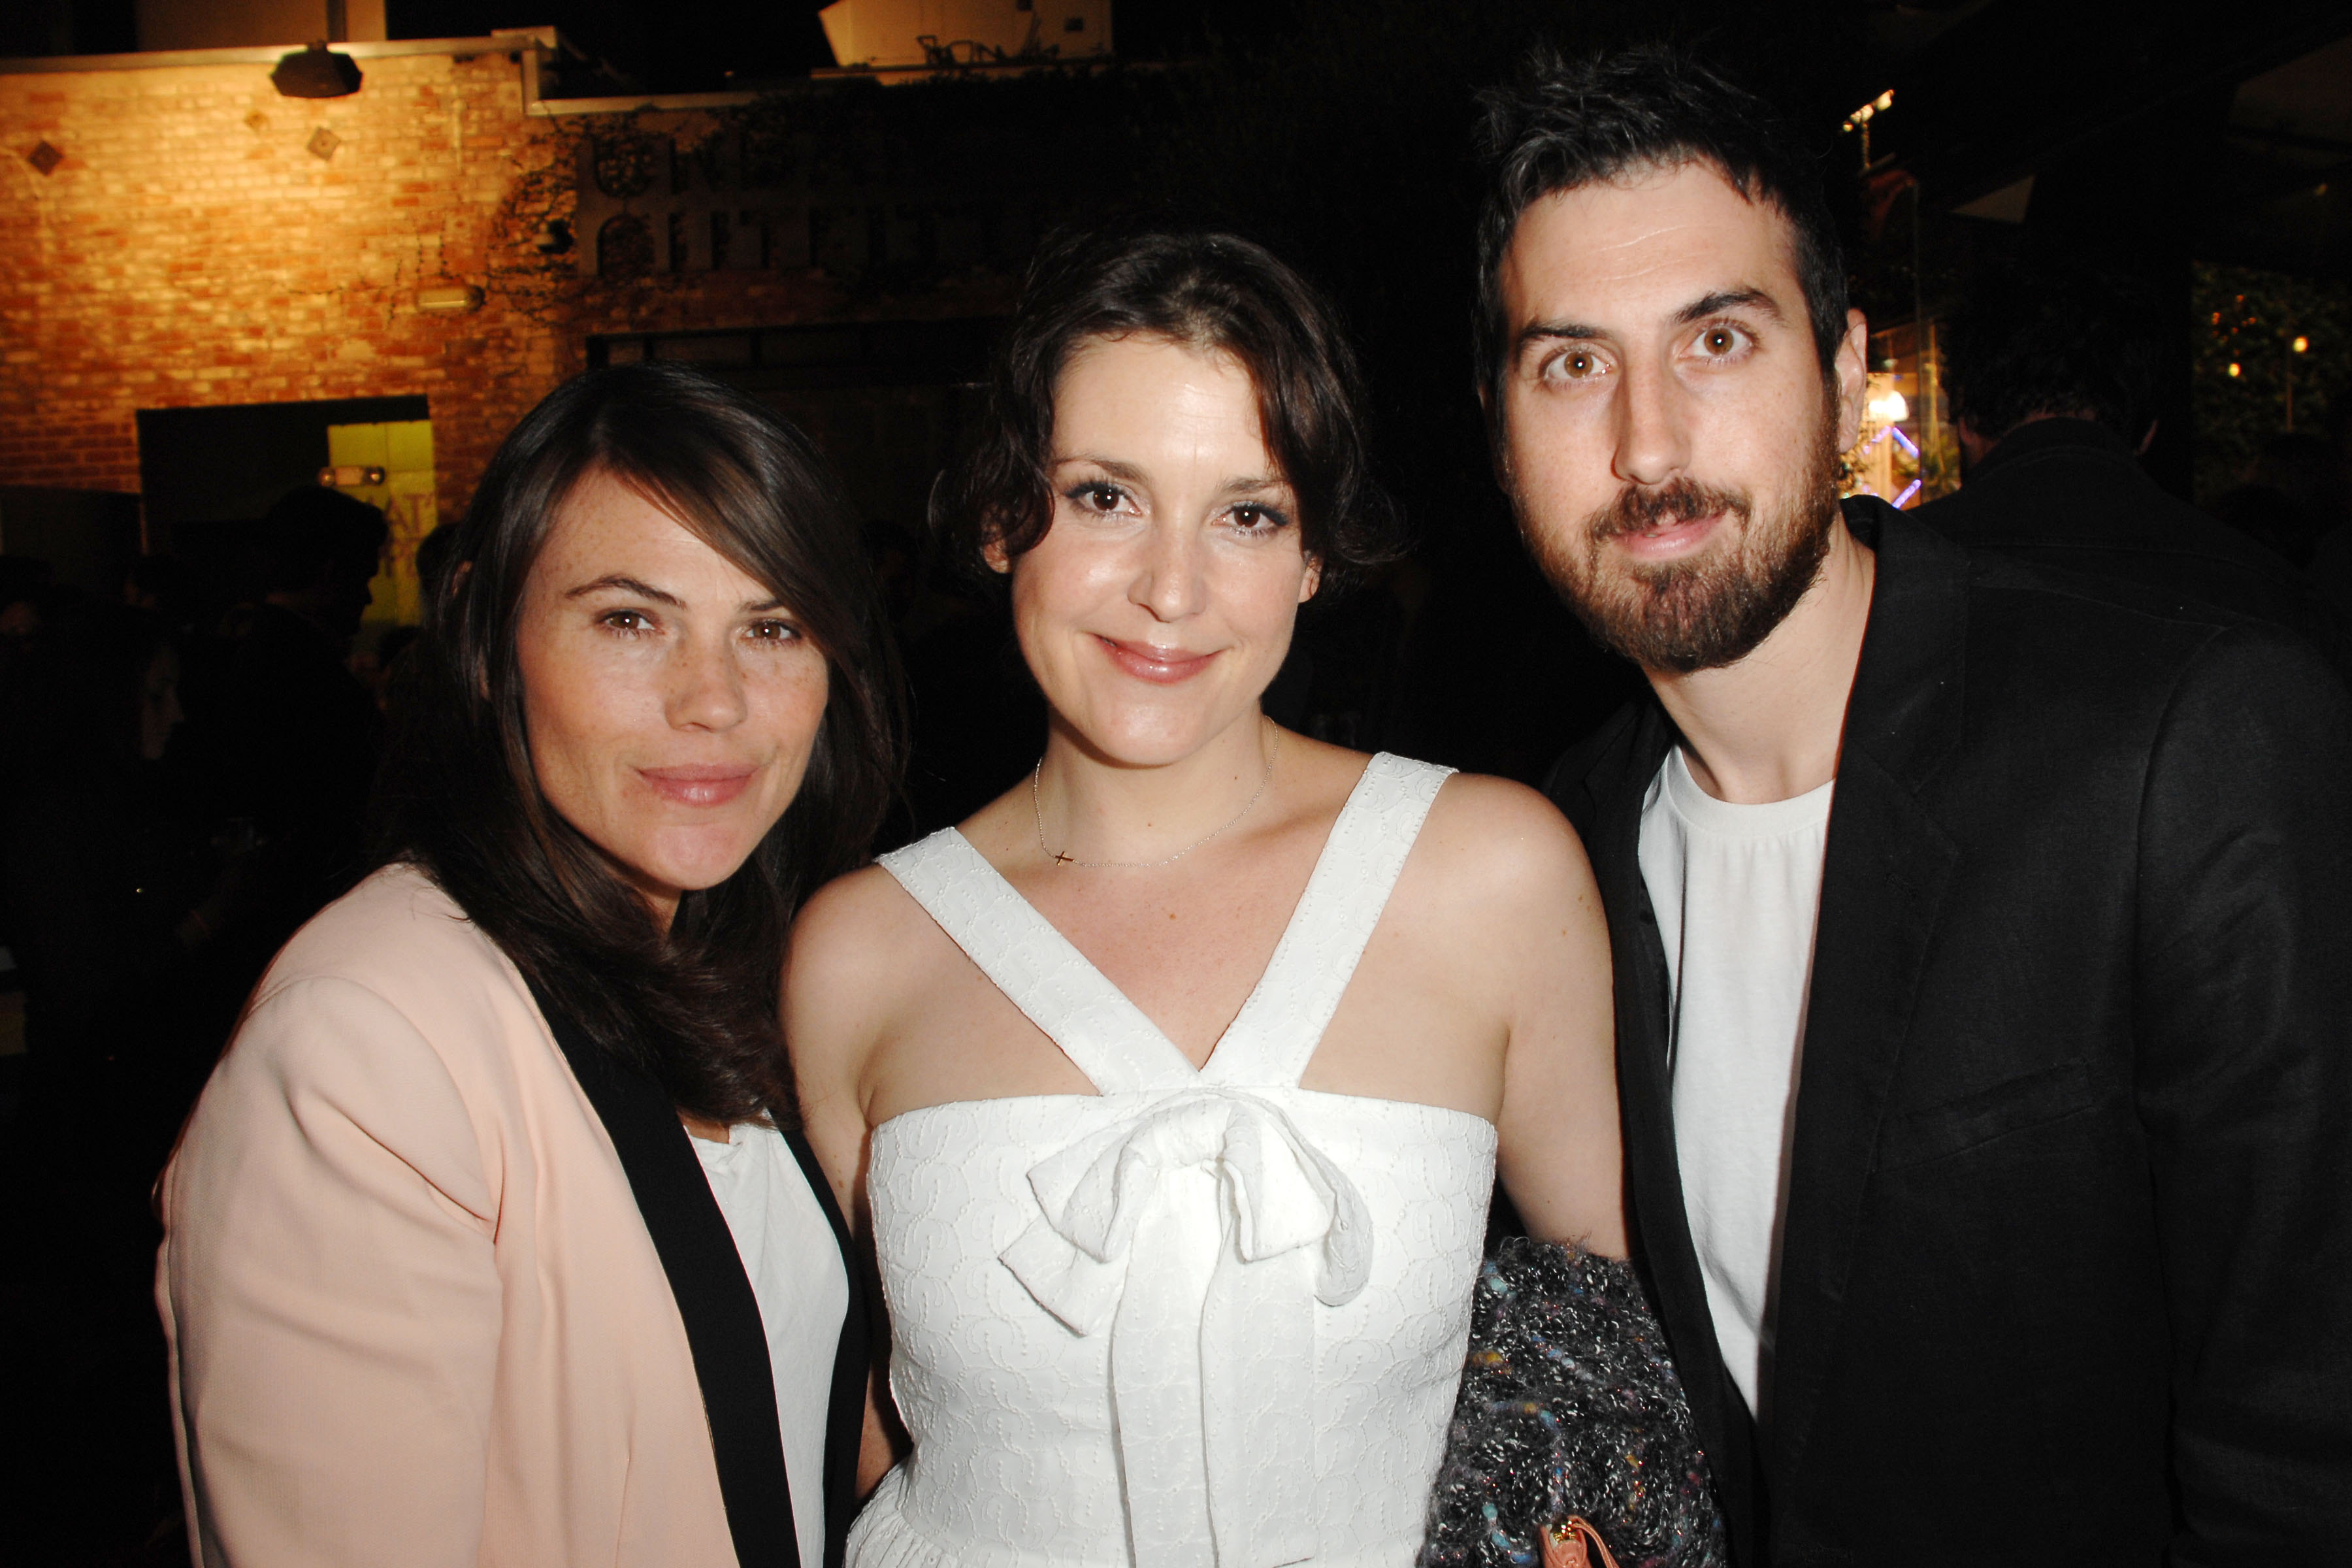 Clea Duvall, Melanie Lynsky, Ti West - Original Penguin and SVEDKA Vodka present a special Los Angeles screening of Magnolia Pictures' DRINKING BUDDIES - photo by Patrick McMullan